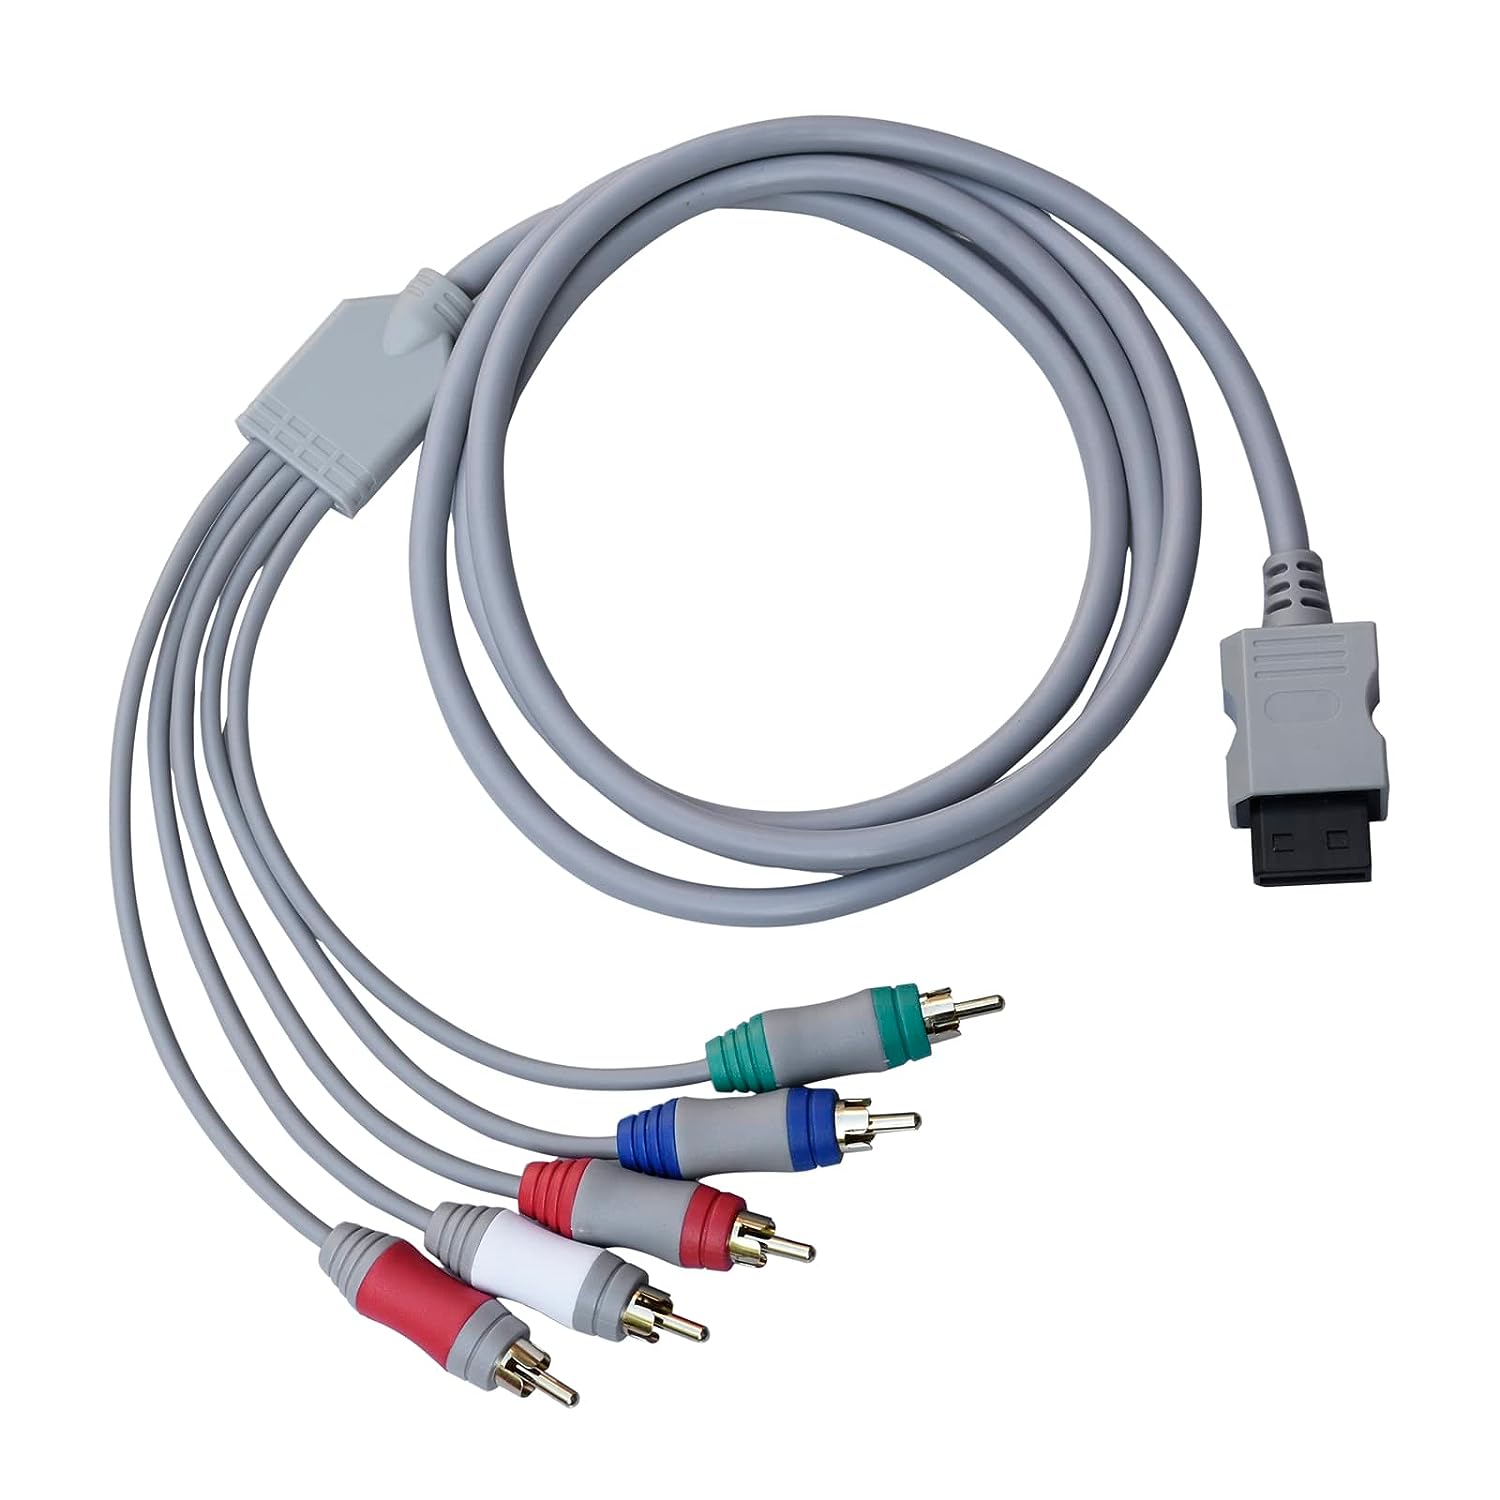 Bealuffe Component Cable for Wii, AV Cable Cable for [...]